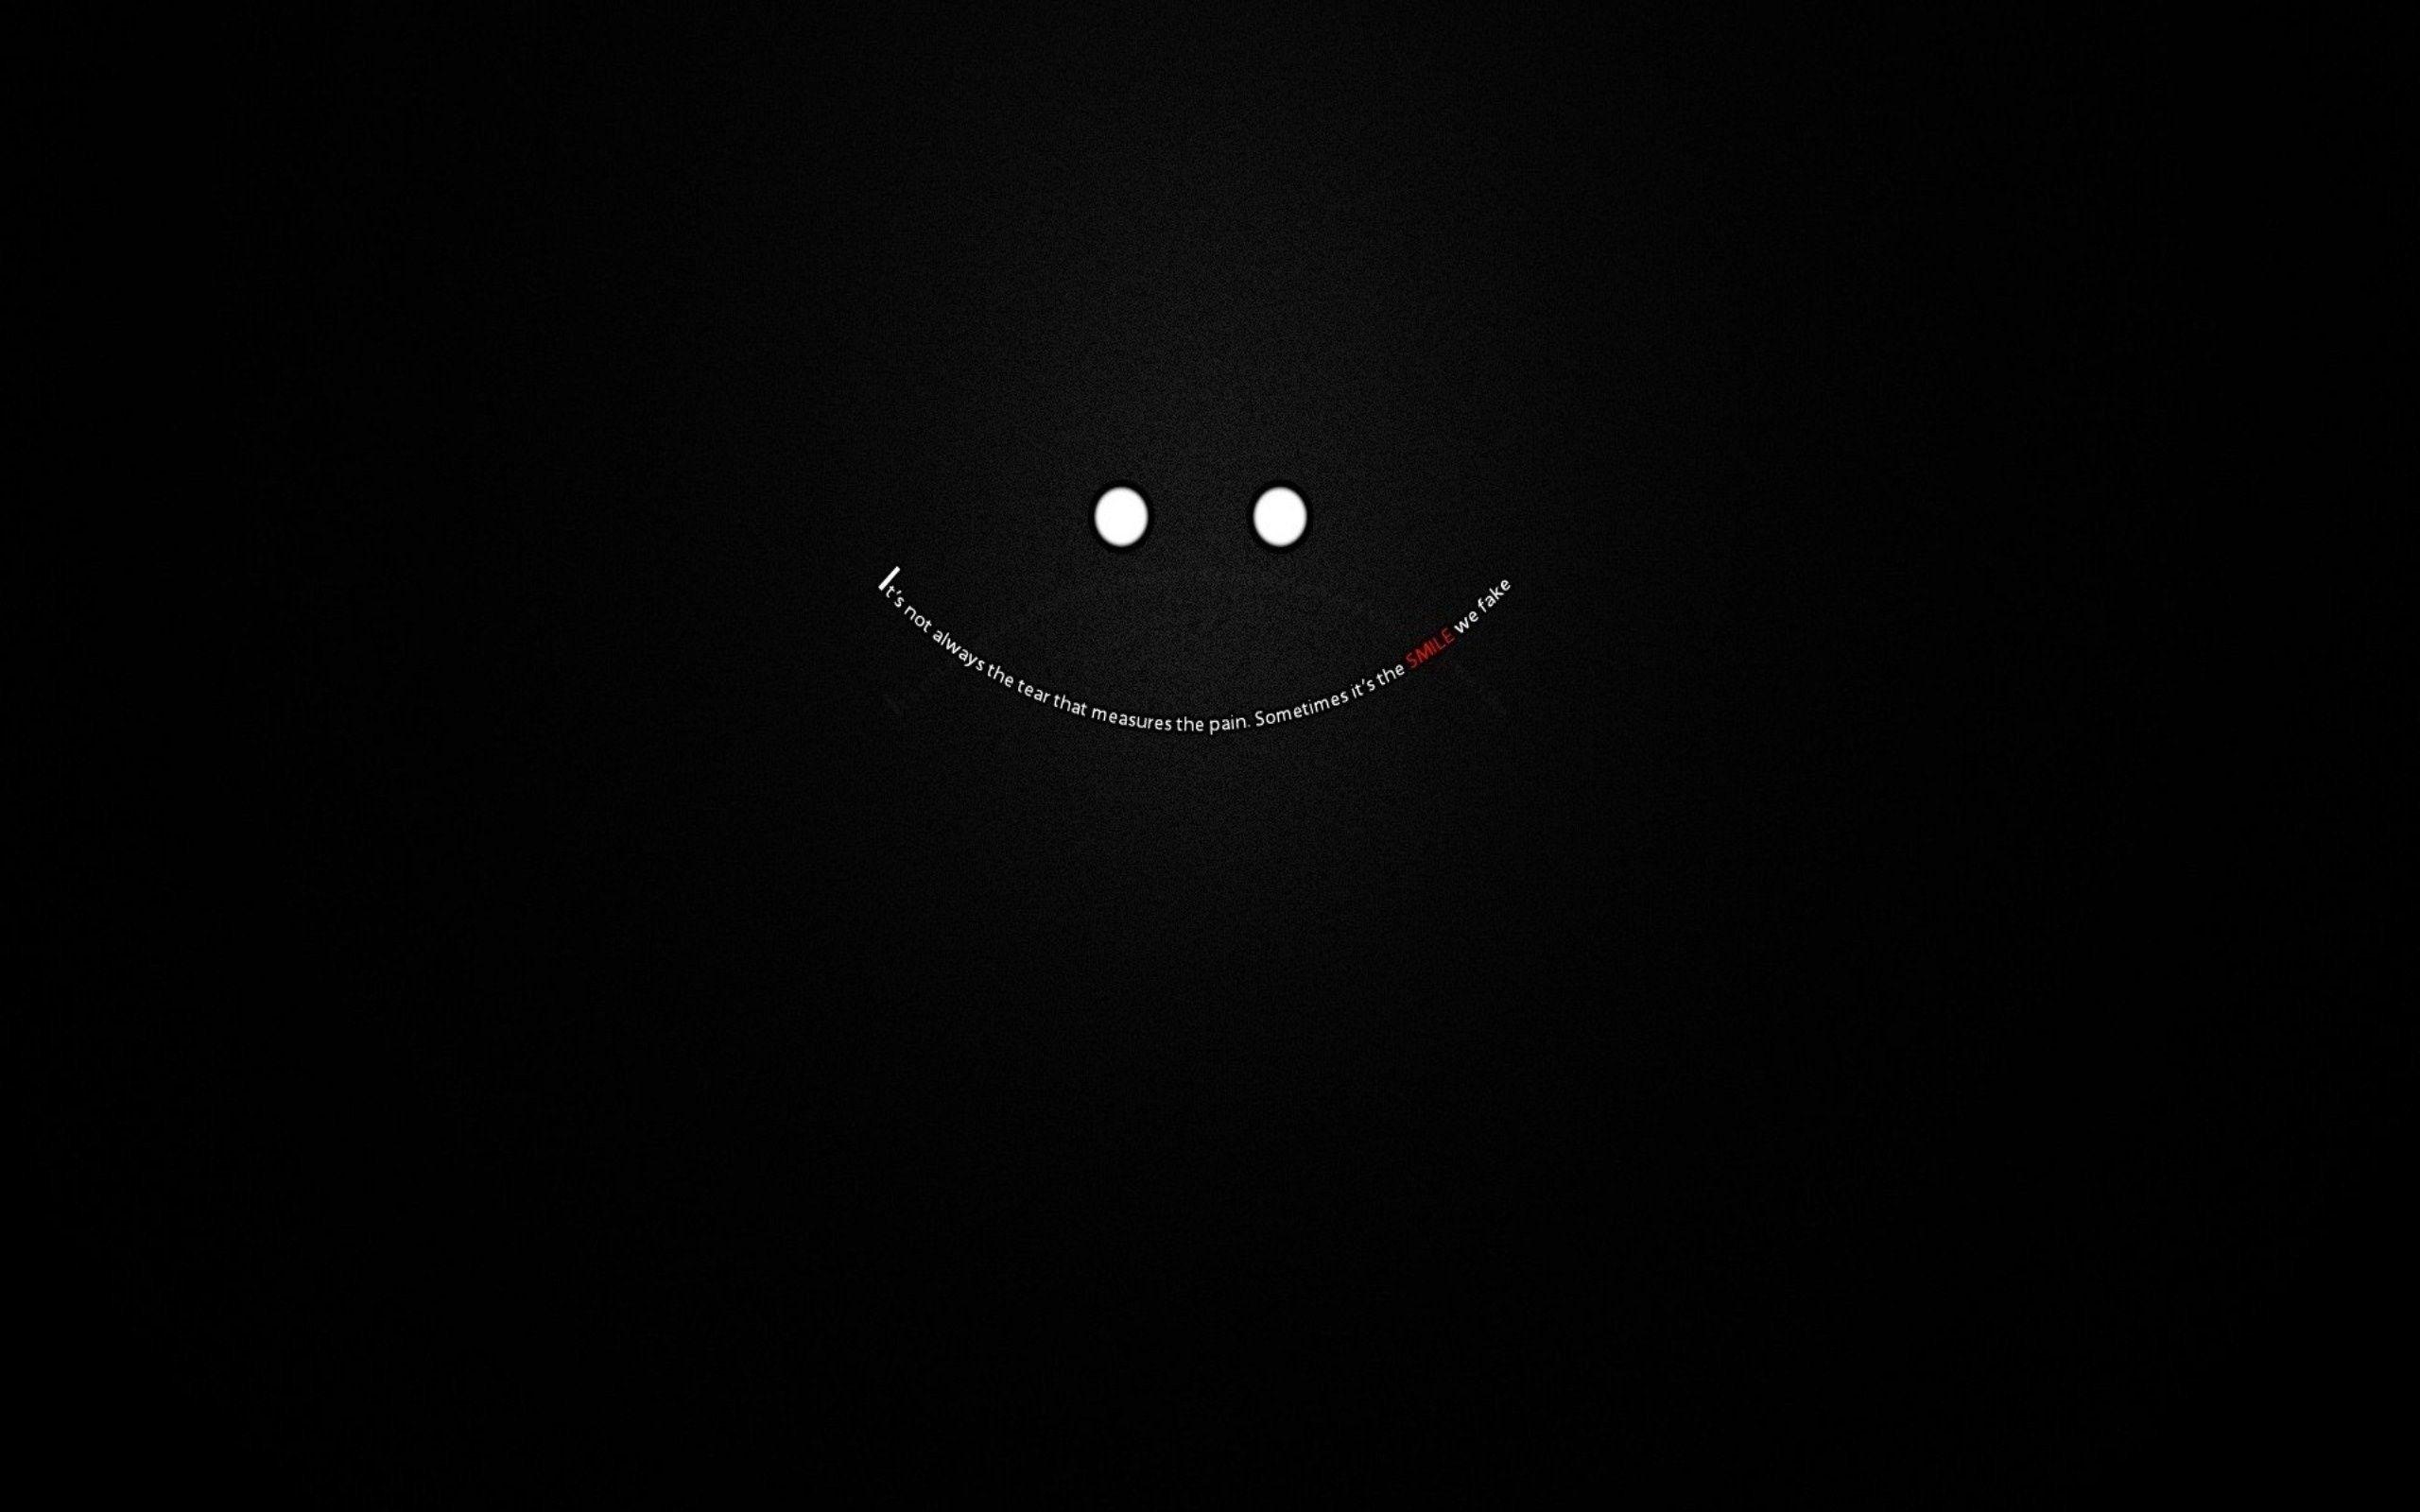 Happy Face Black Wallpapers Wallpaper Cave